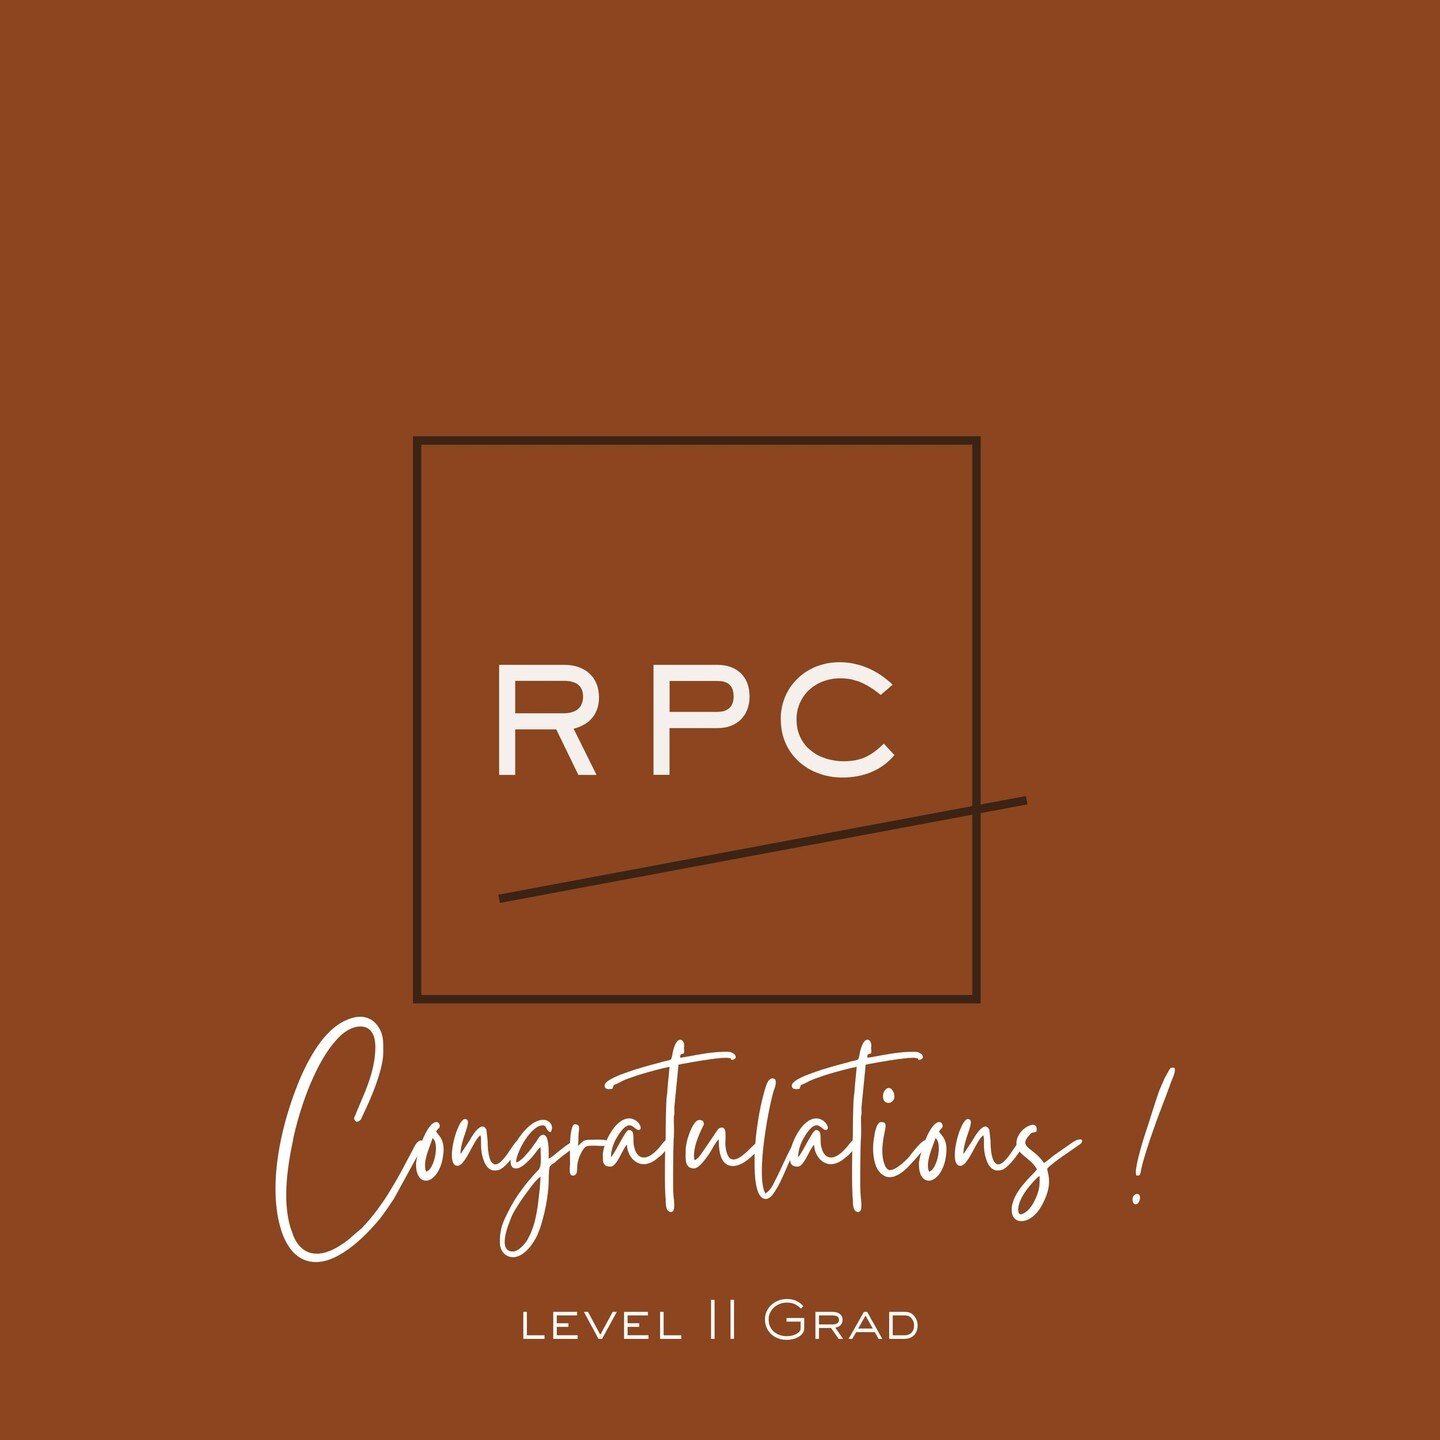 Congratulations Jess Erb on completing your Level II assessments! 

The Pilates community is lucky to have you! 

#ohiopilates
#pilatesapprentice
#leveliigrad
#rebelpilatescollective